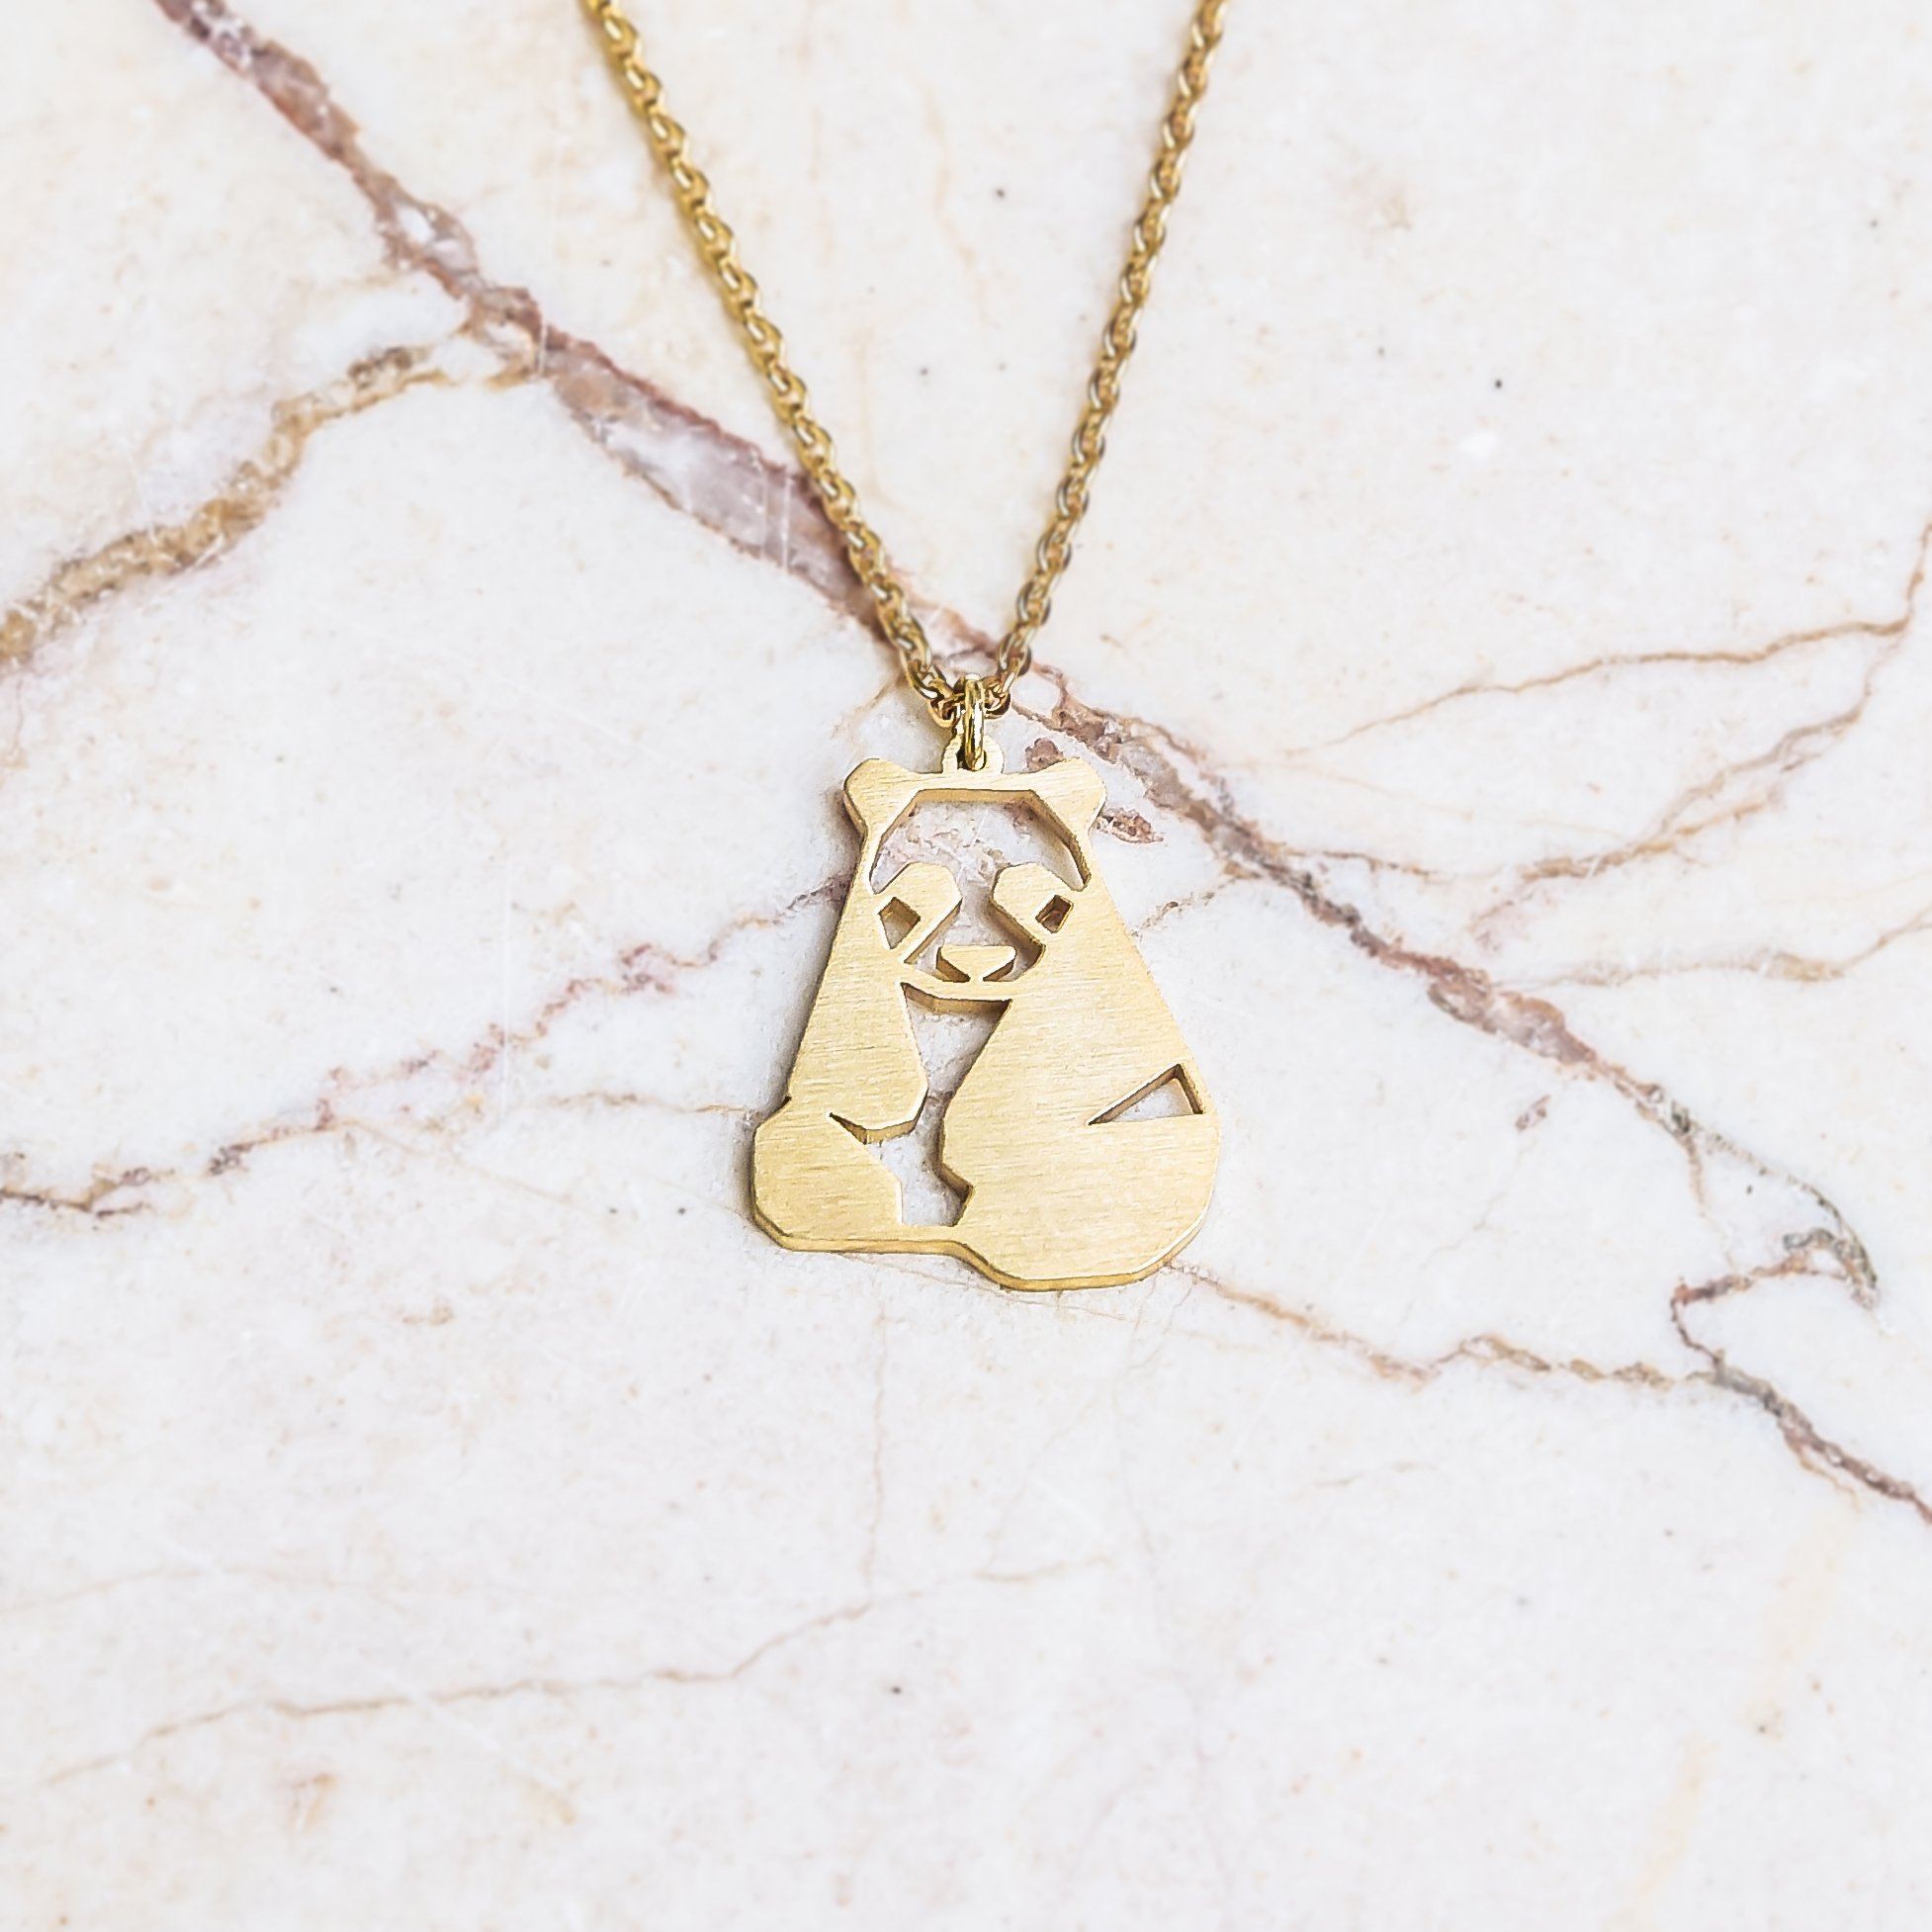 Buy 14K Gold Panda Necklace, Gold Panda Bear Pendant, Panda Face Design  Choker, Animal Charm Jewelry, Unique Necklace, Luck Pendant Gift for Her  Online in India - Etsy